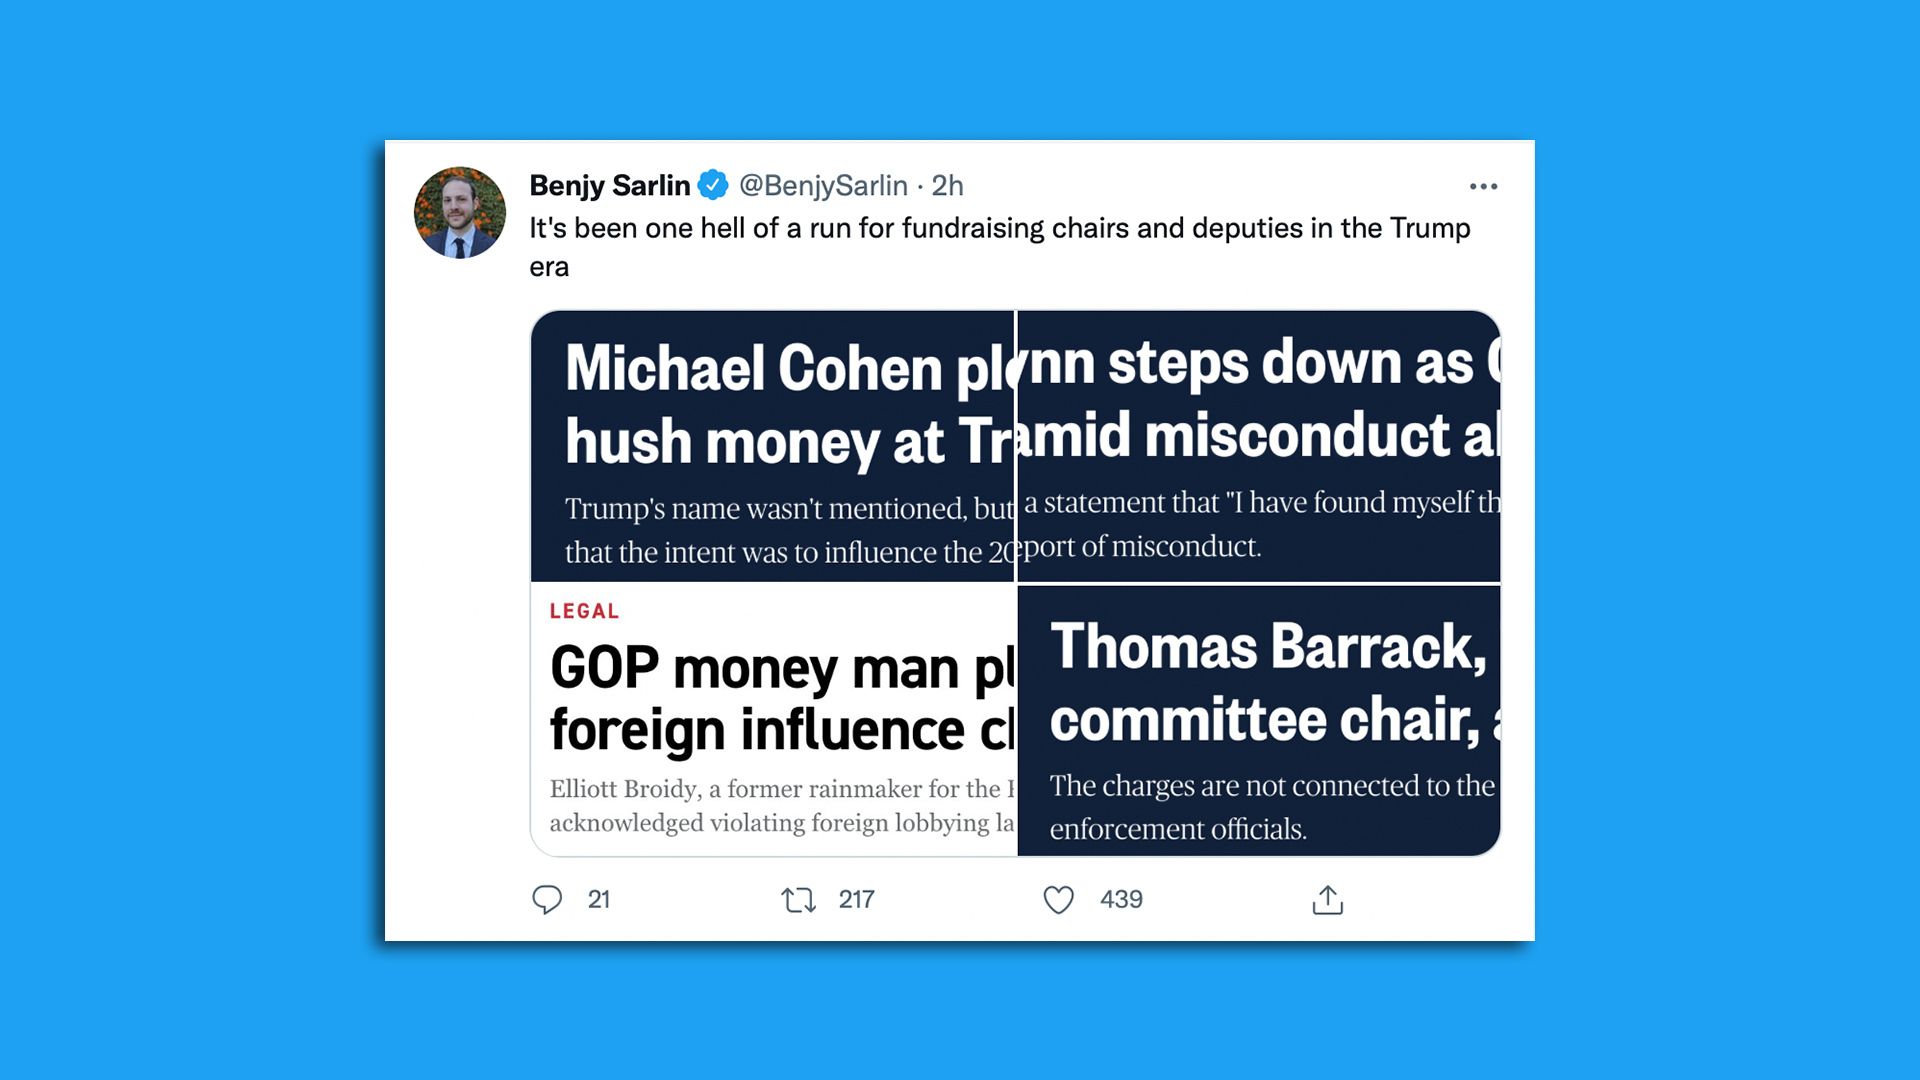 A screenshot shows a tweet about the legal problems faced by former Trump campaign officials.